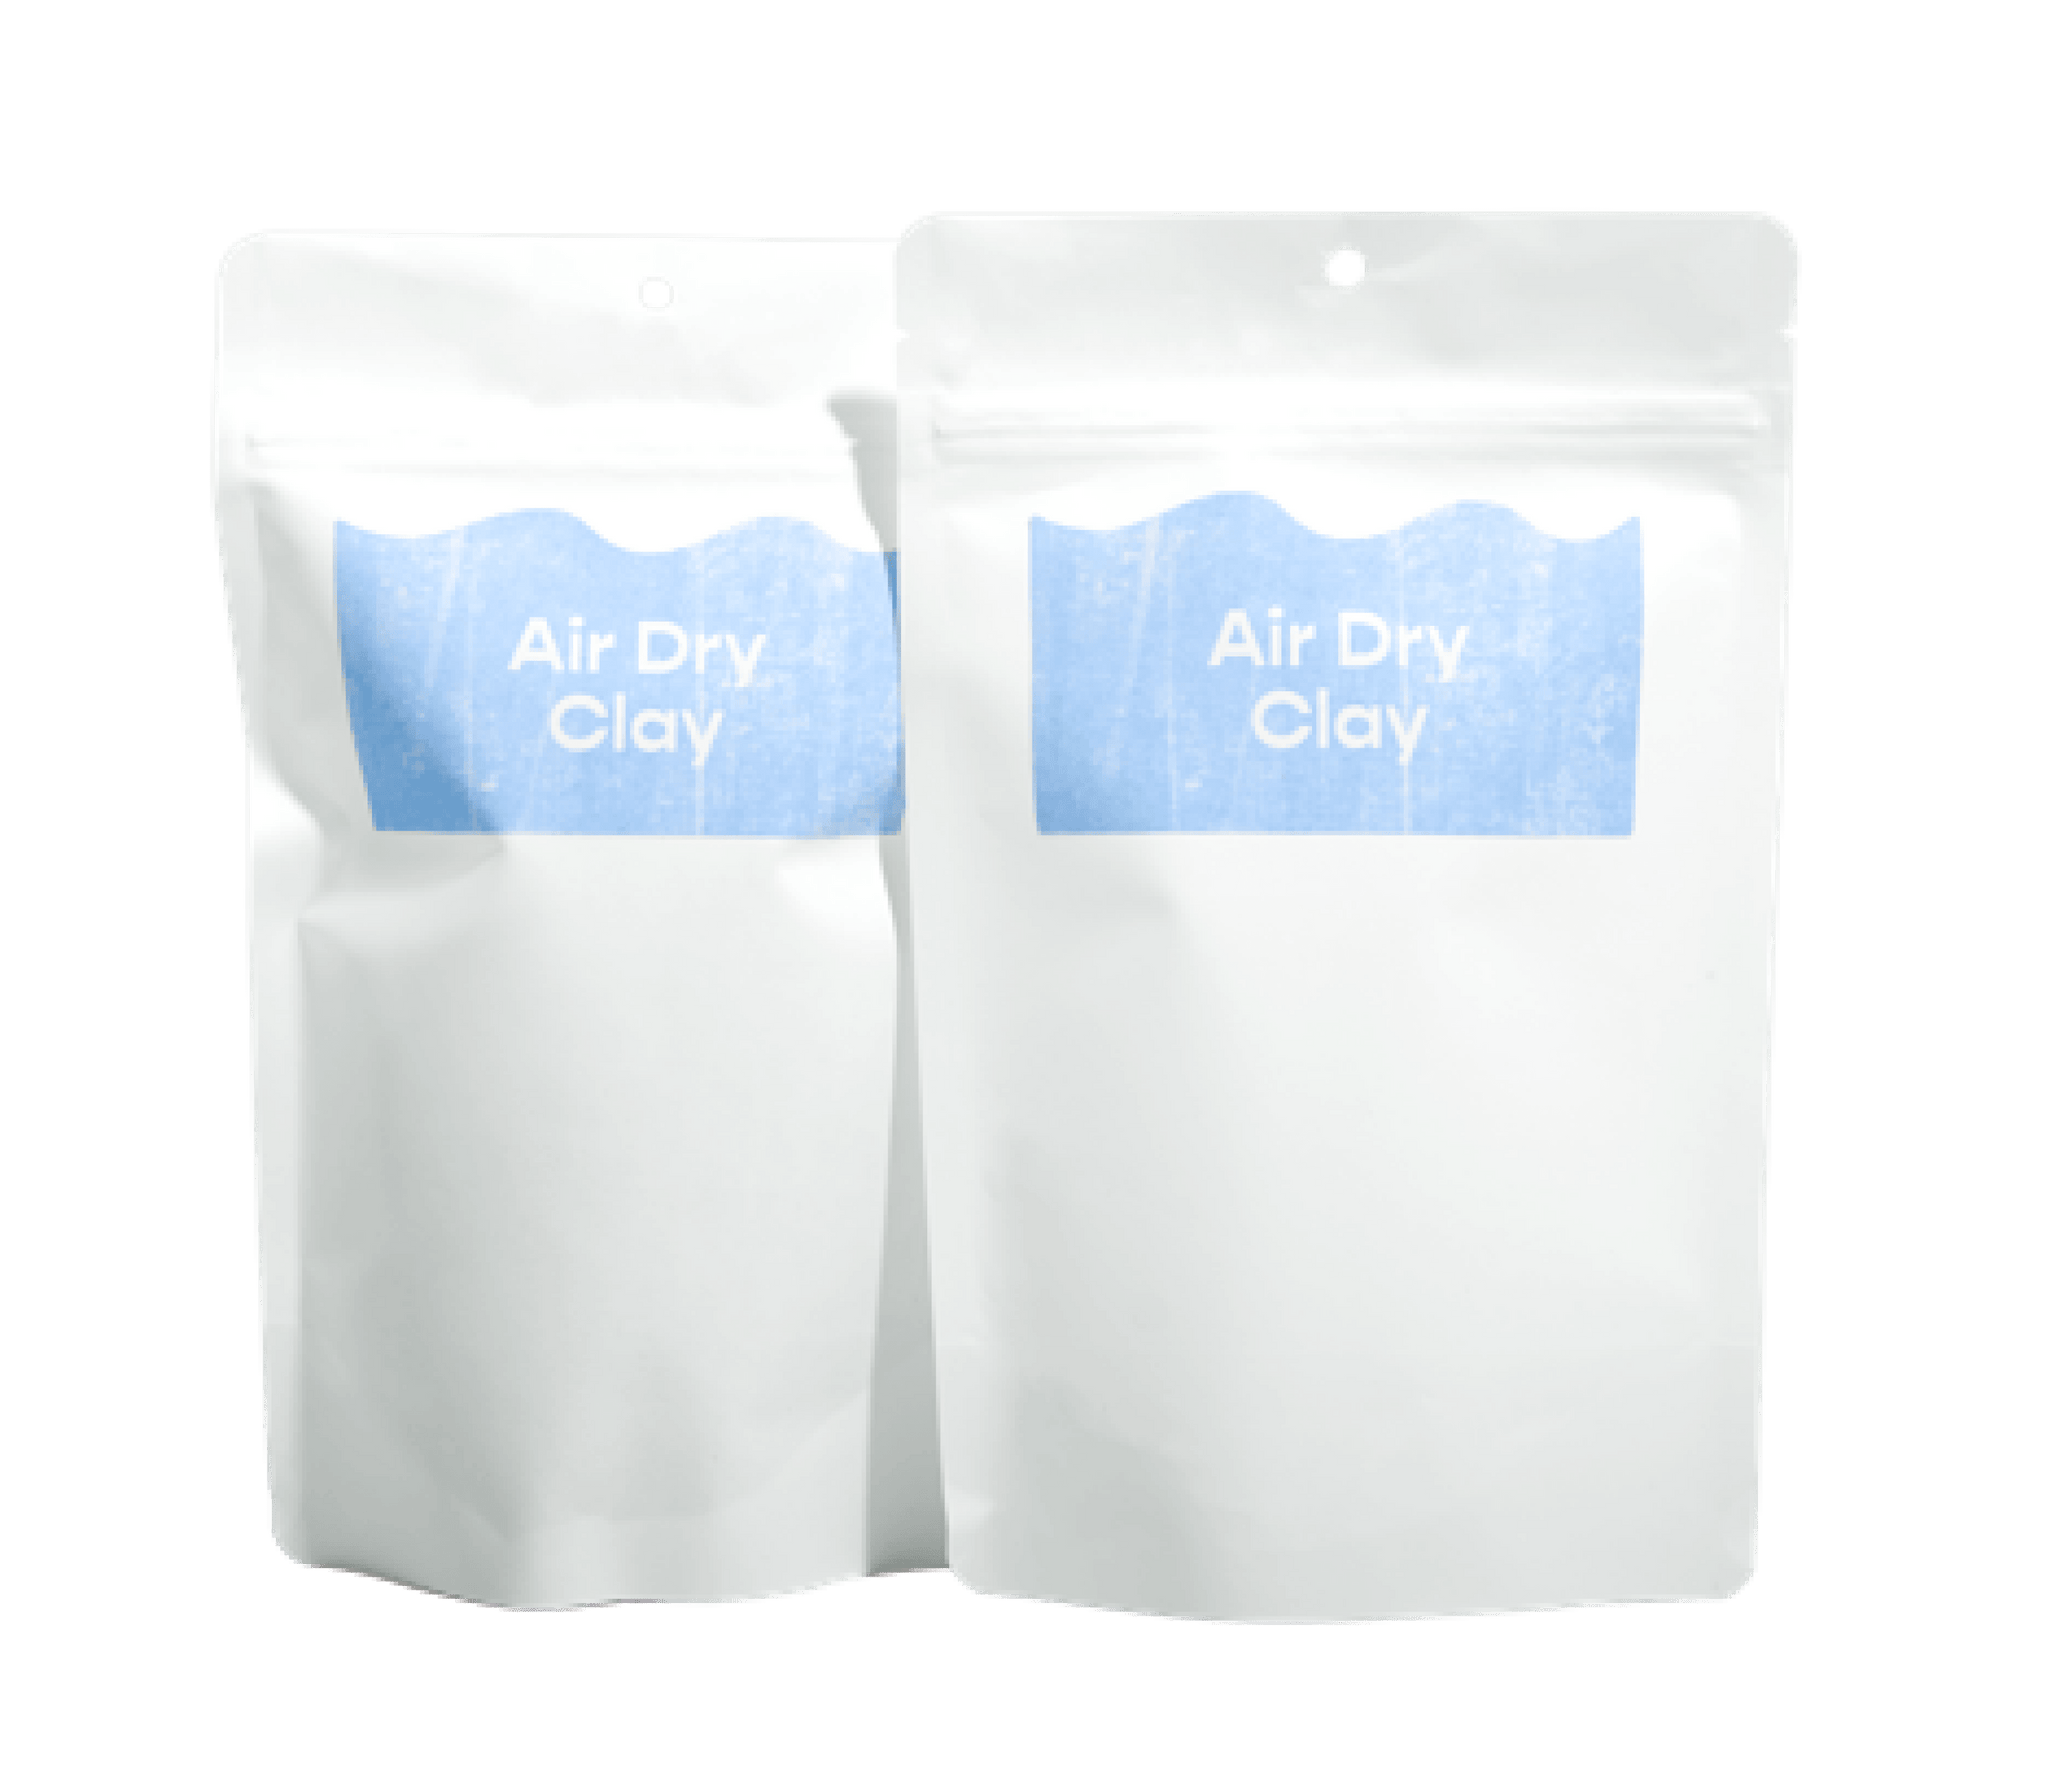 Sculpd Air Dry Clay Pottery Kit Review